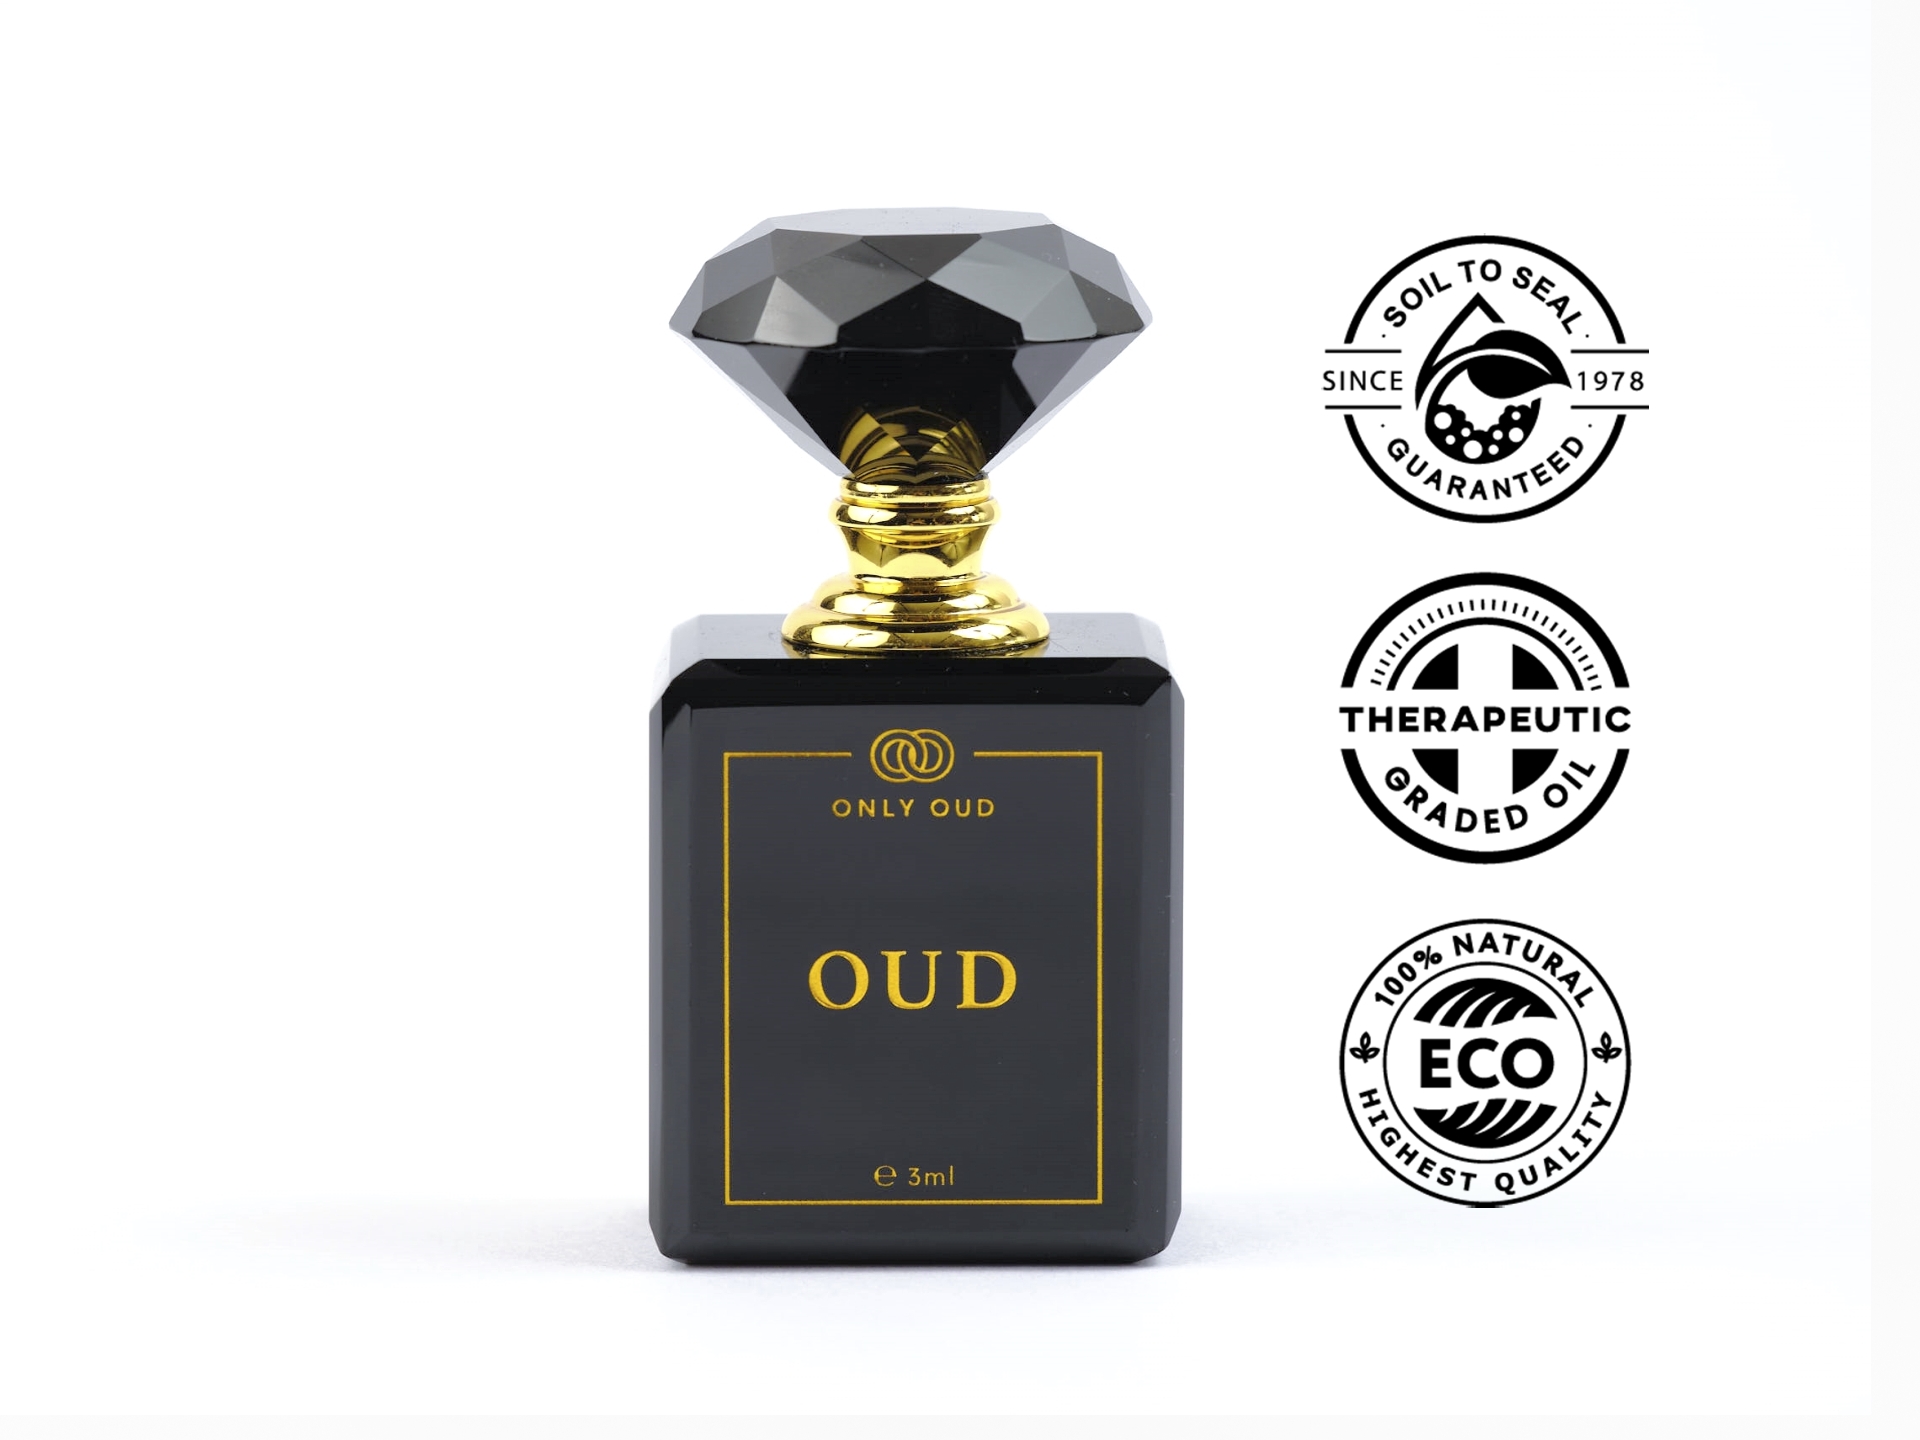 ONLY OUD OIL